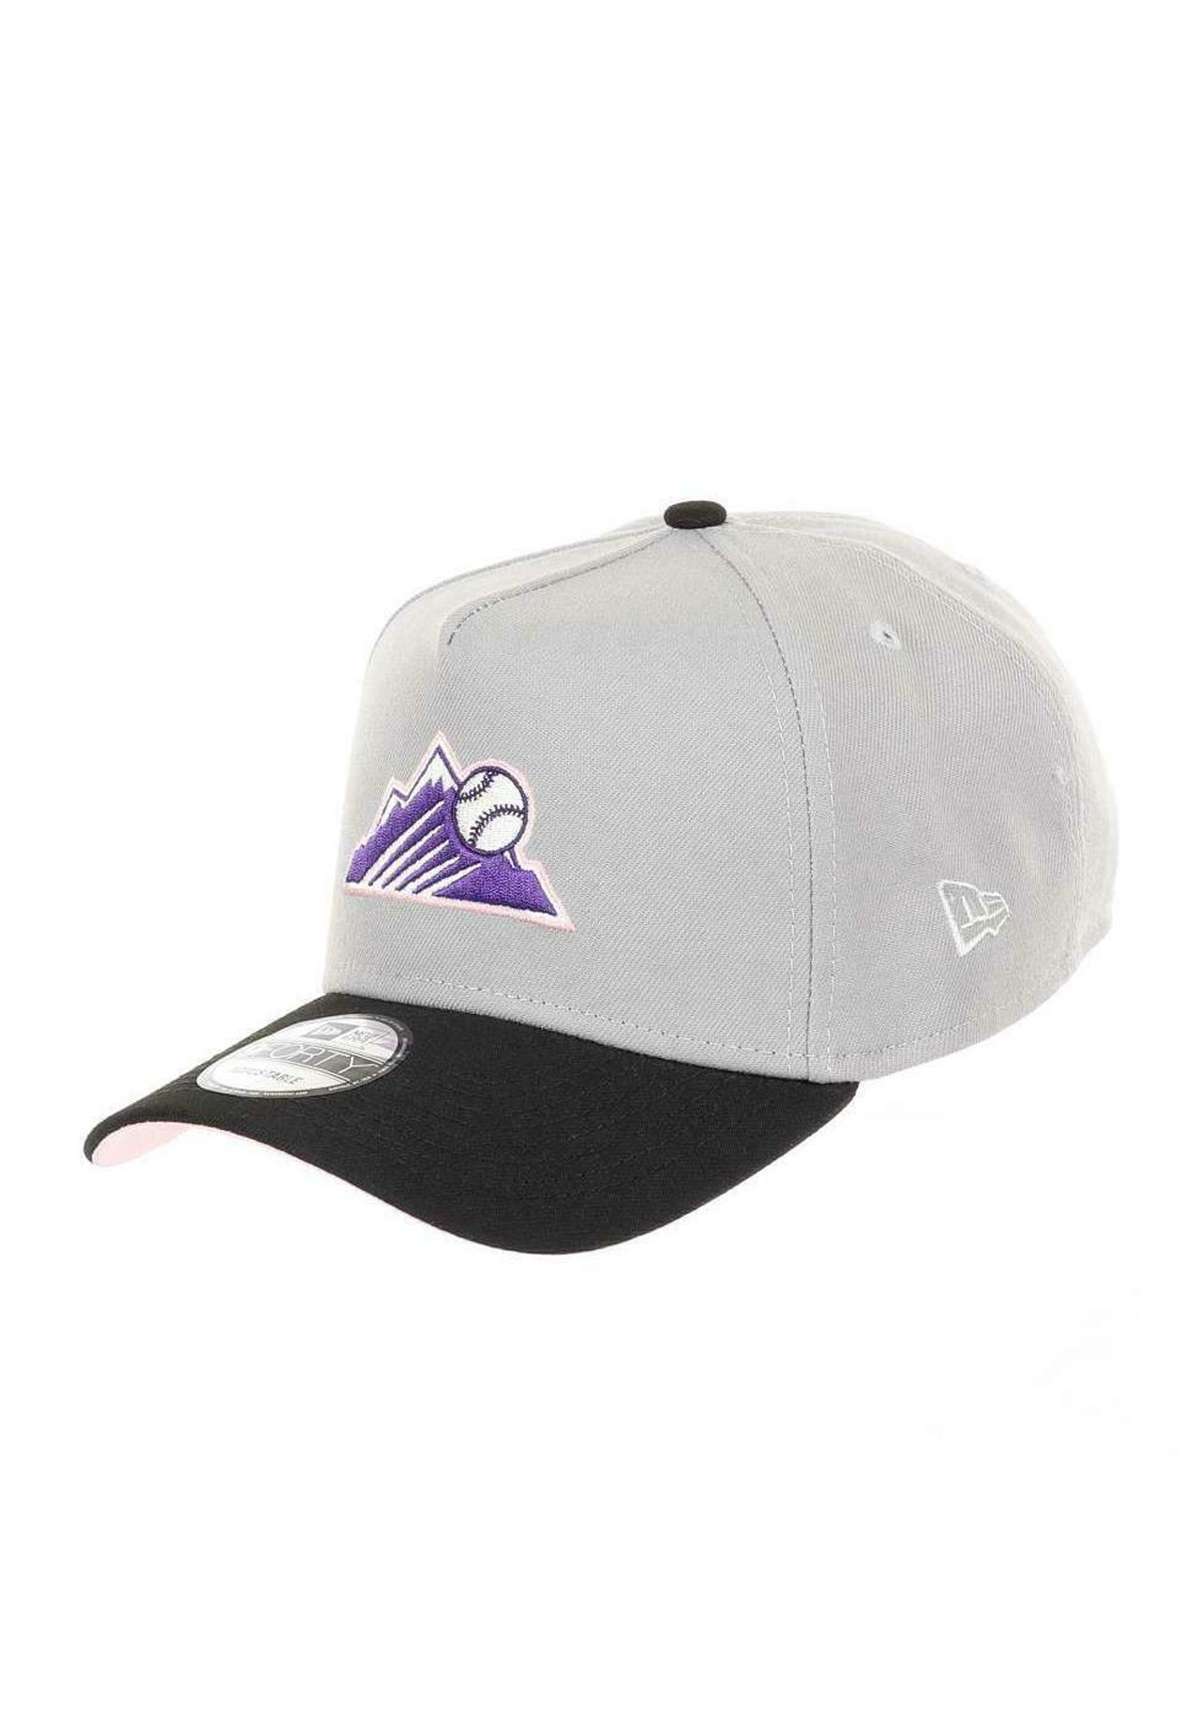 Кепка COLORADO ROCKIES MLB COOPERSTOWN ALL-STAR GAME 2021 SIDEPATCH 9FORTY A-FRAME ADJUSTABLE